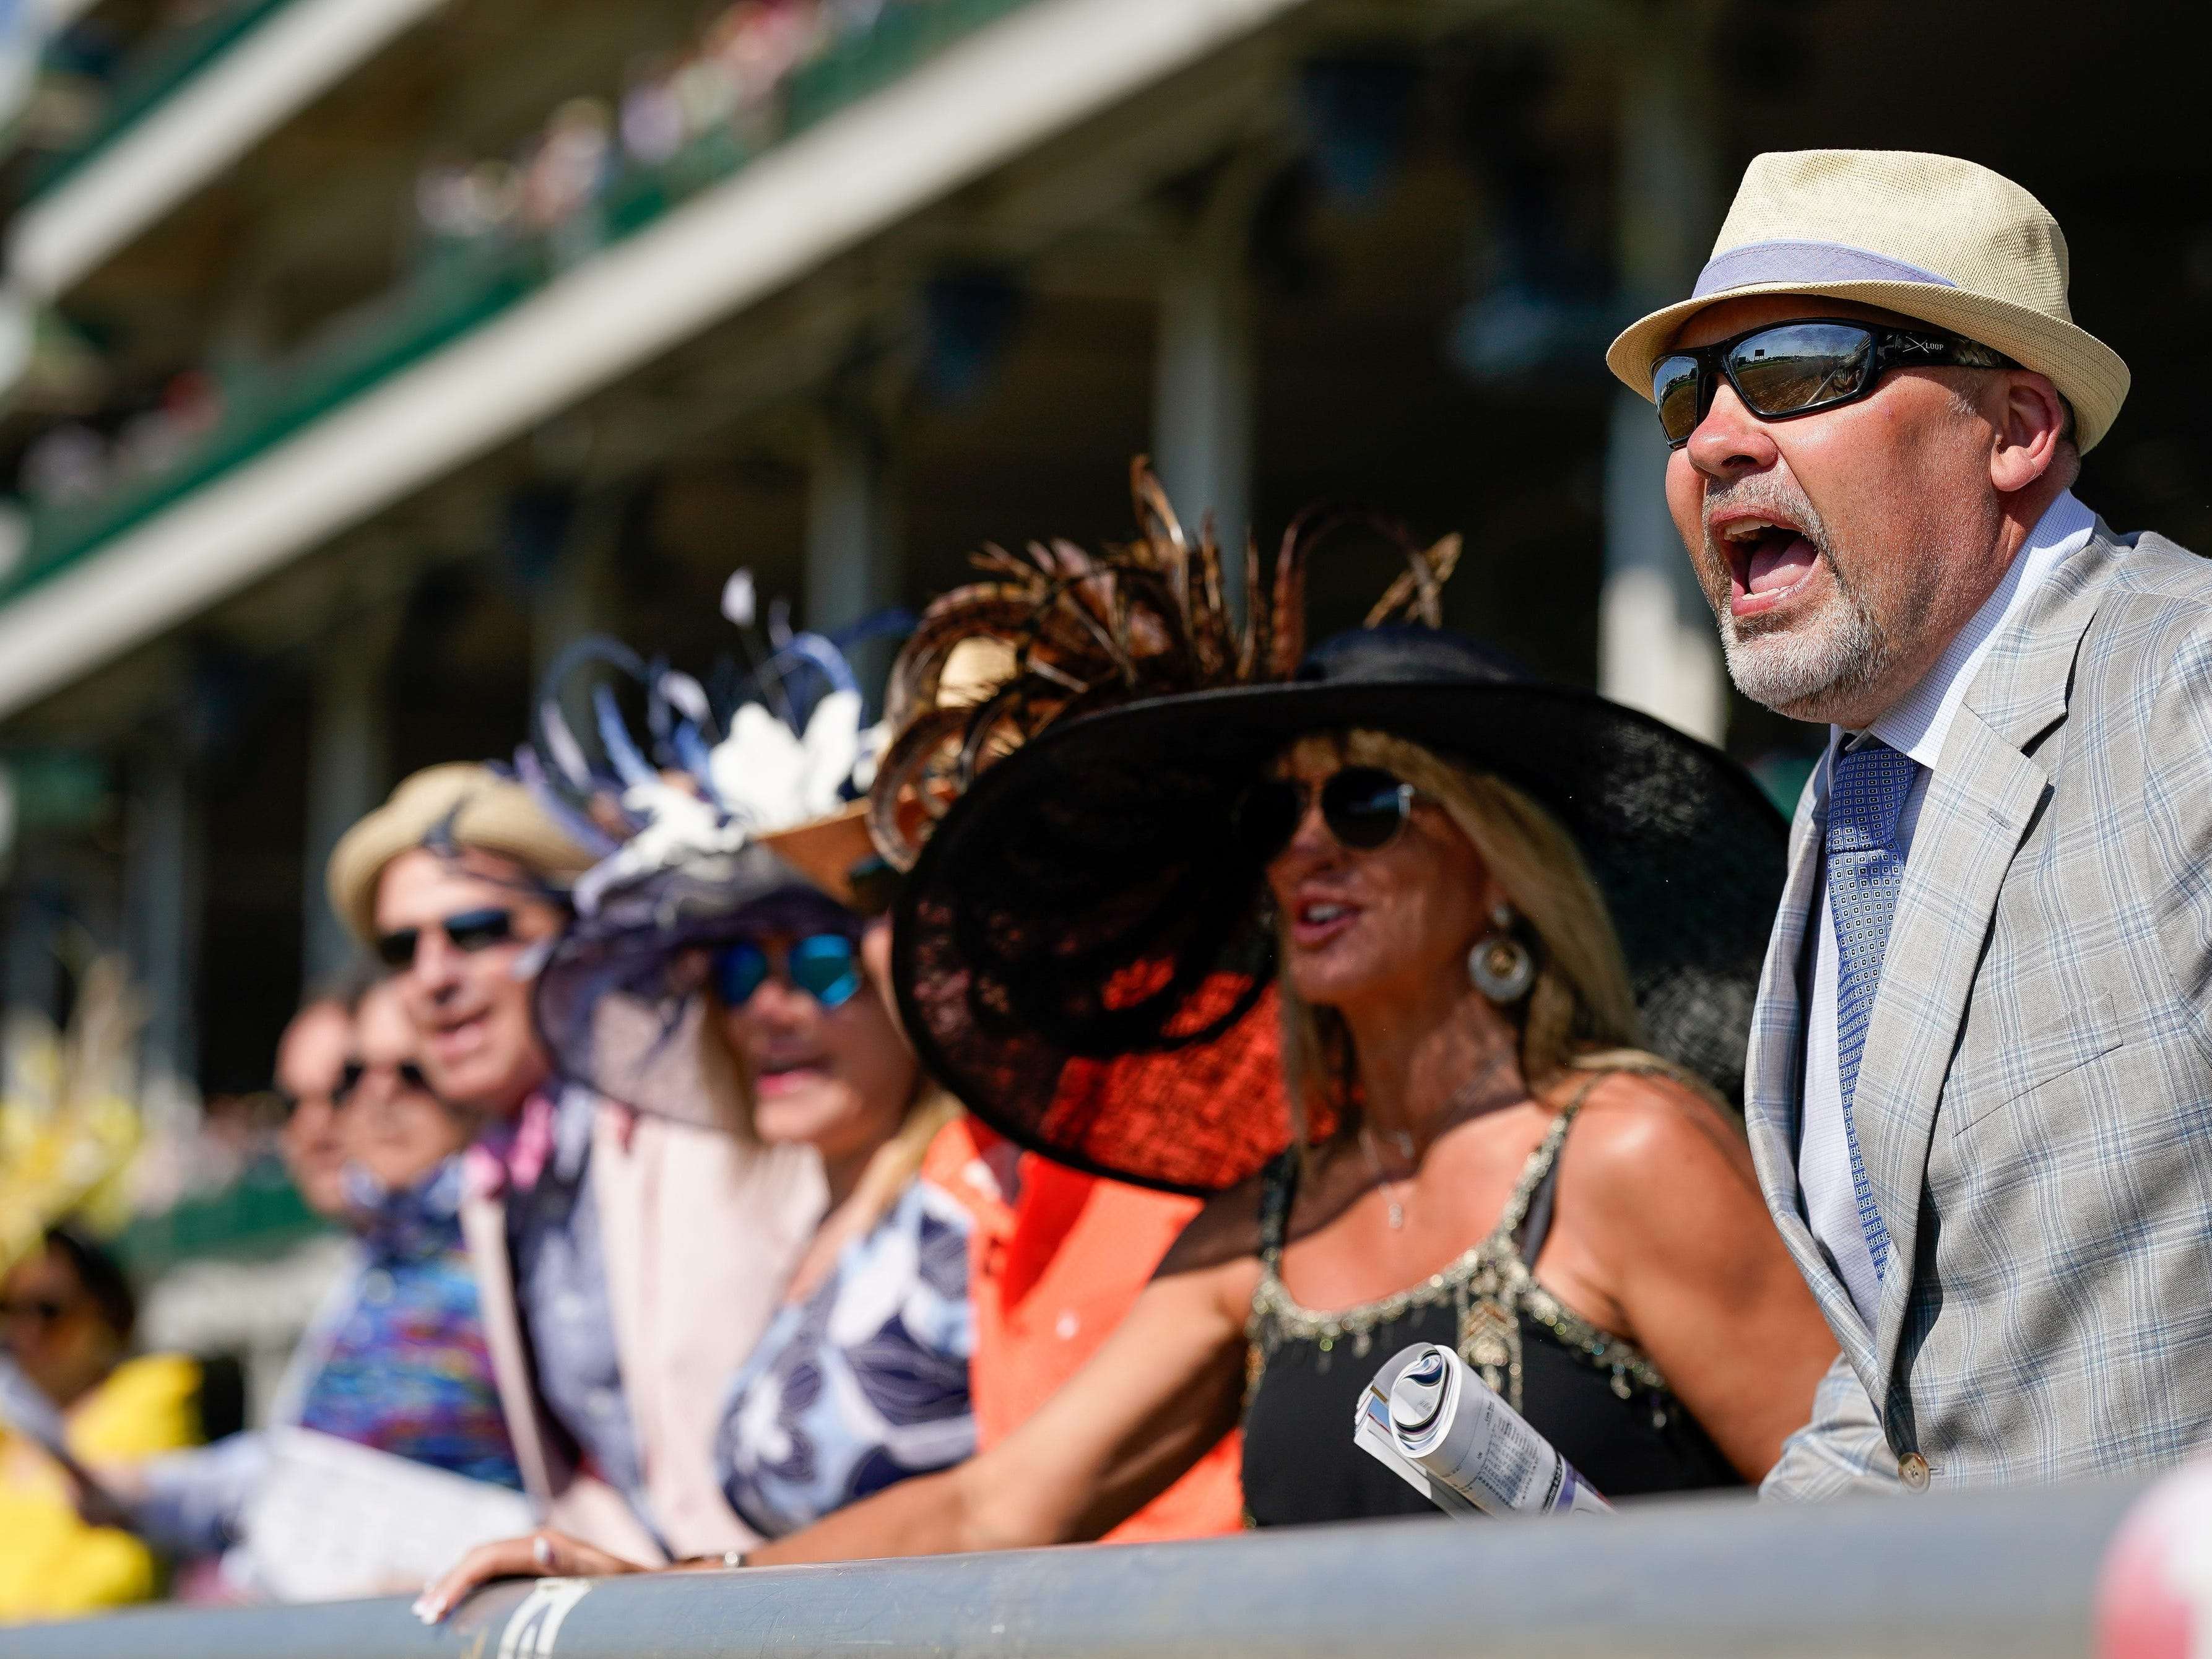 Photos of the Kentucky Derby show that the 'most exciting 2 minutes in